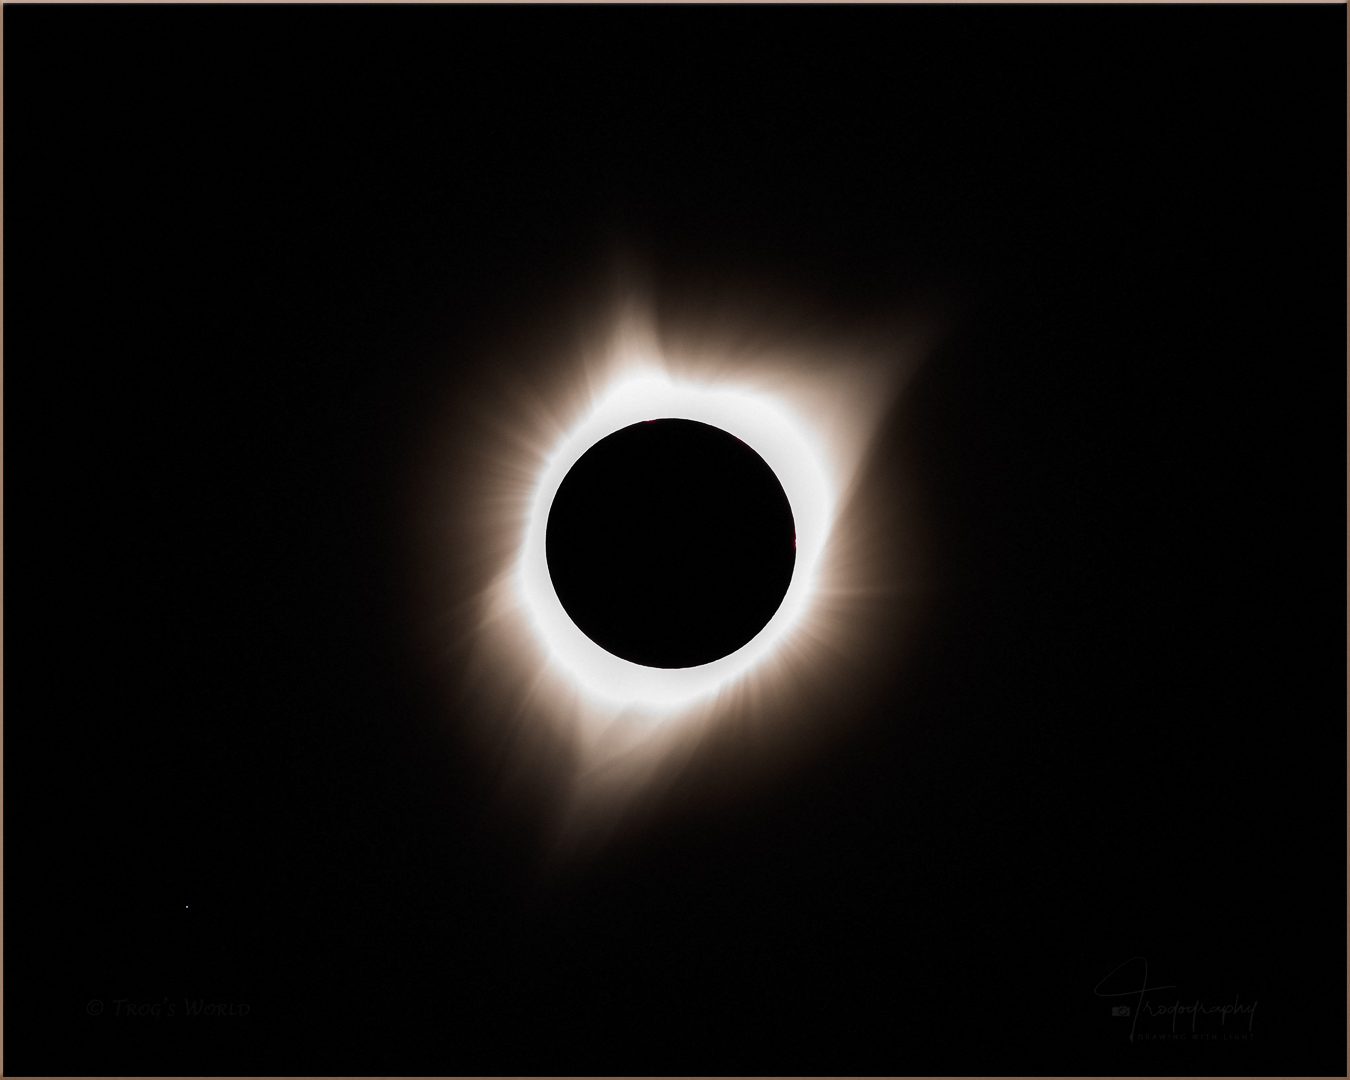 Total Eclipse of the Sun 2017 in Wyoming